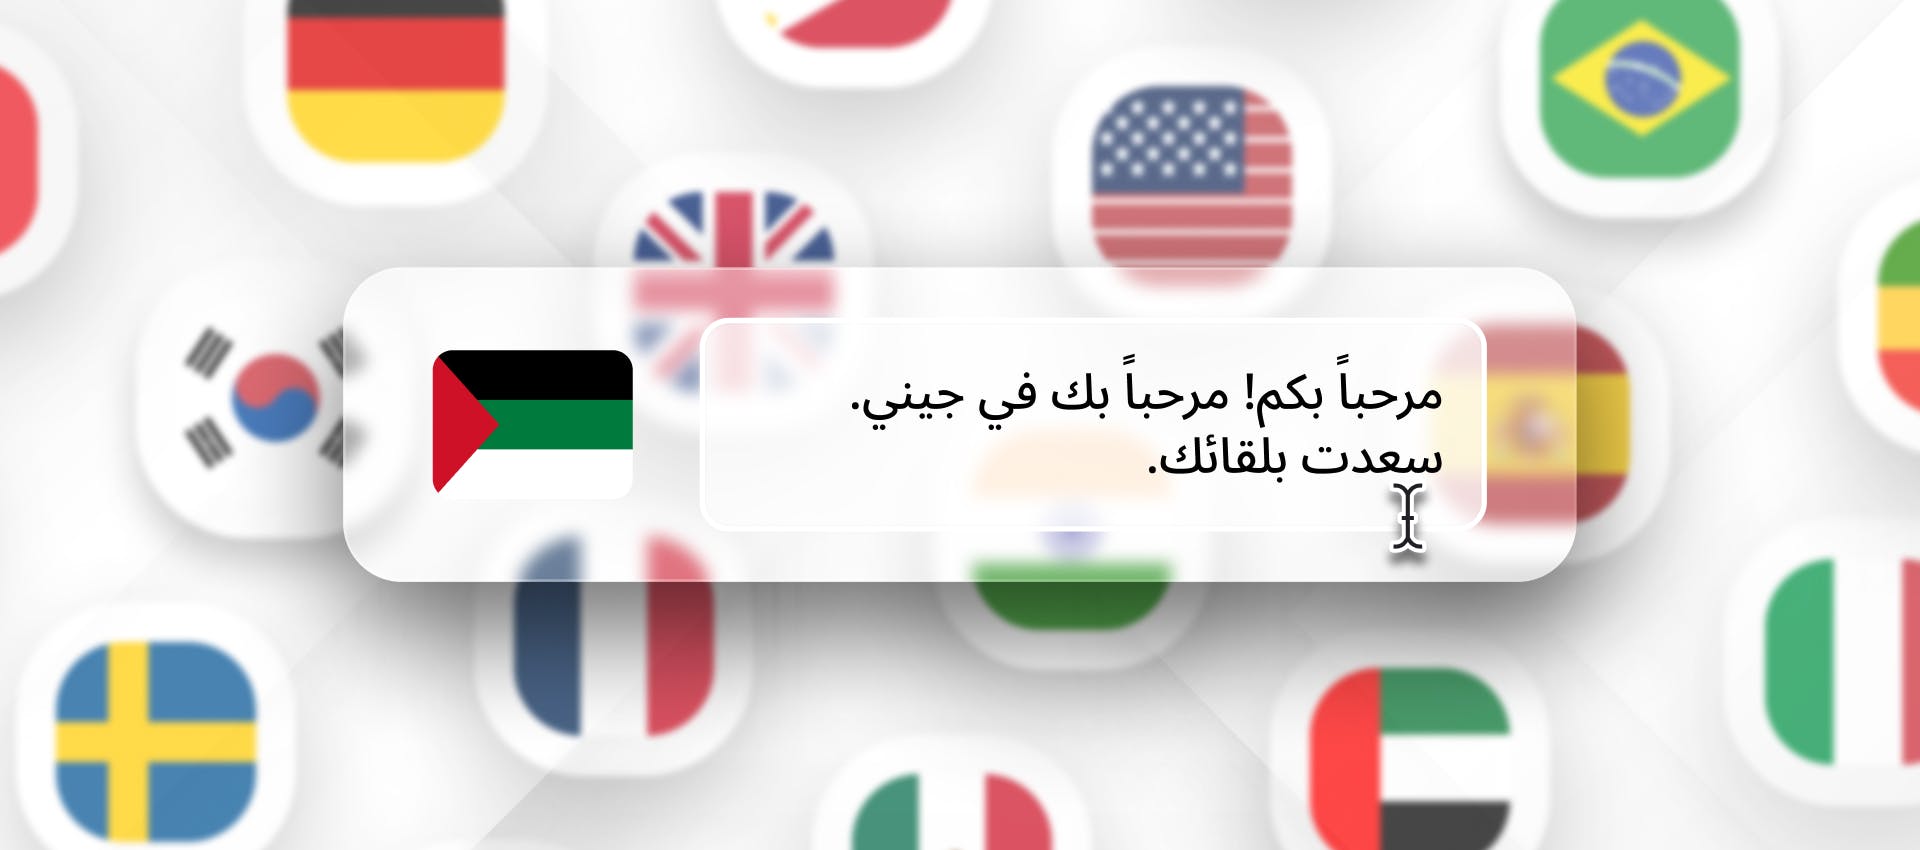 Arabic phrase for TTS with background full of flags